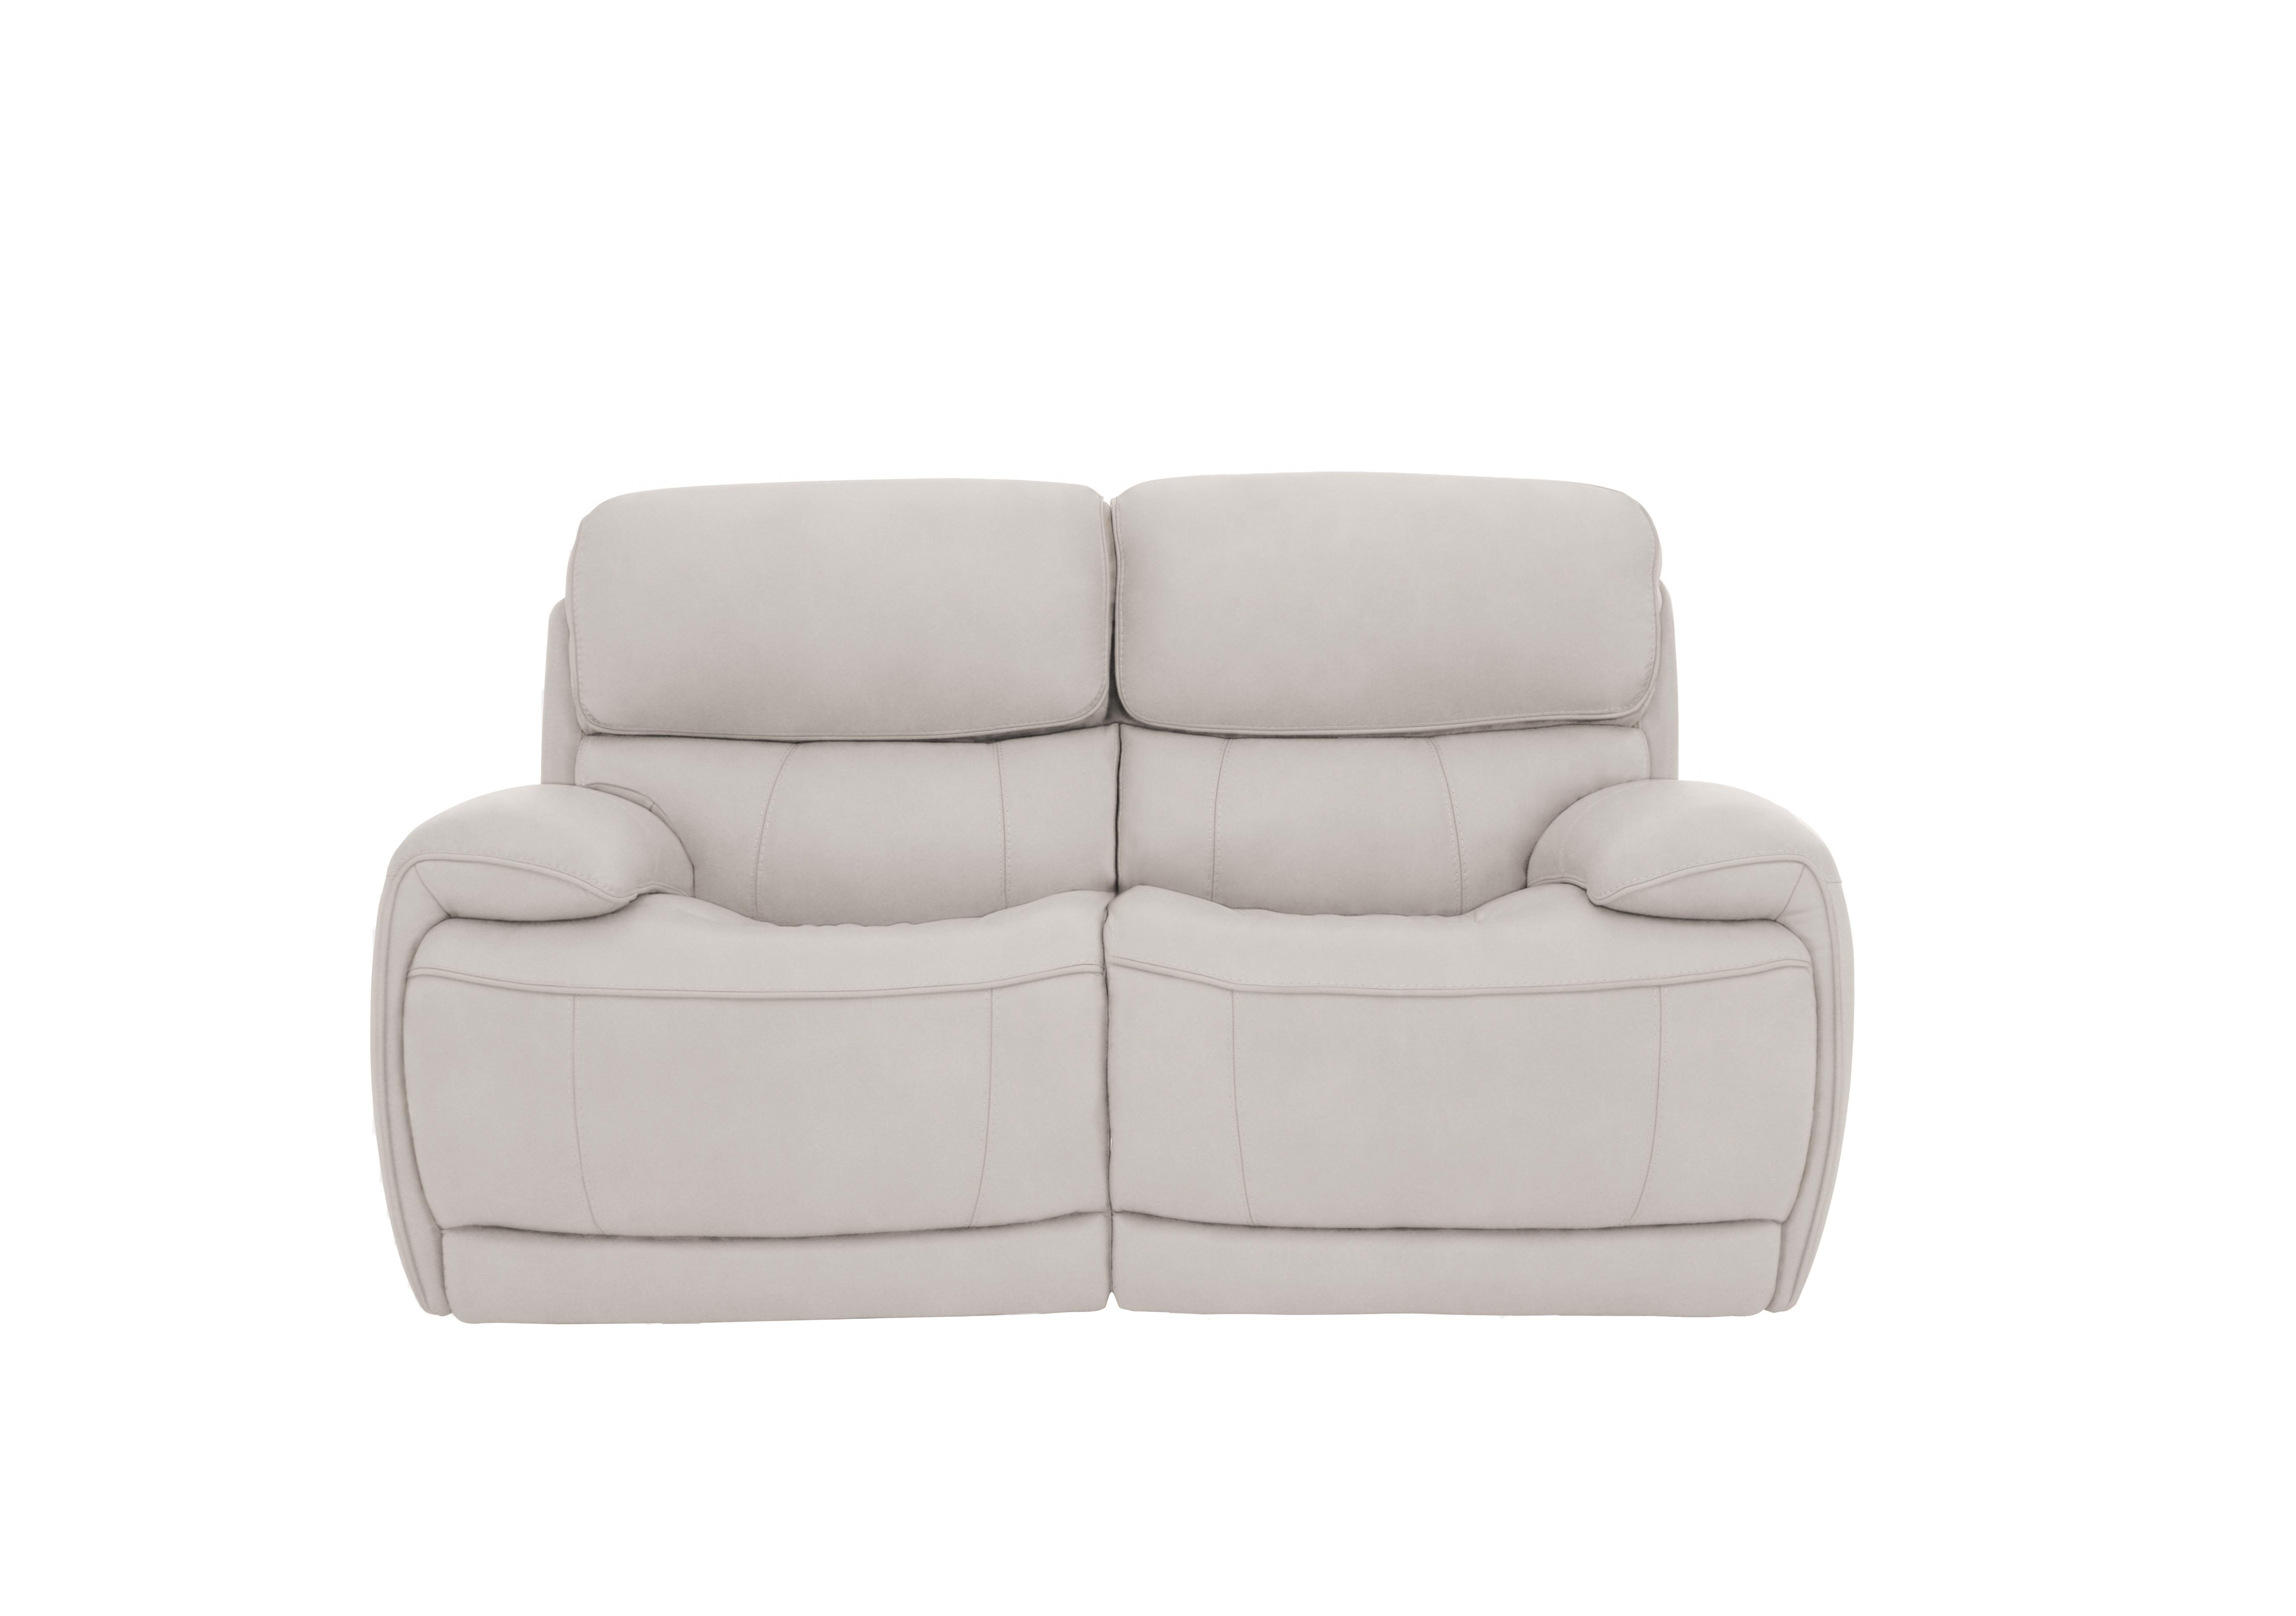 Rocco 2 Seater Fabric Power Rocker Sofa with Power Headrests in Bfa-Mad-R02 Feather on Furniture Village